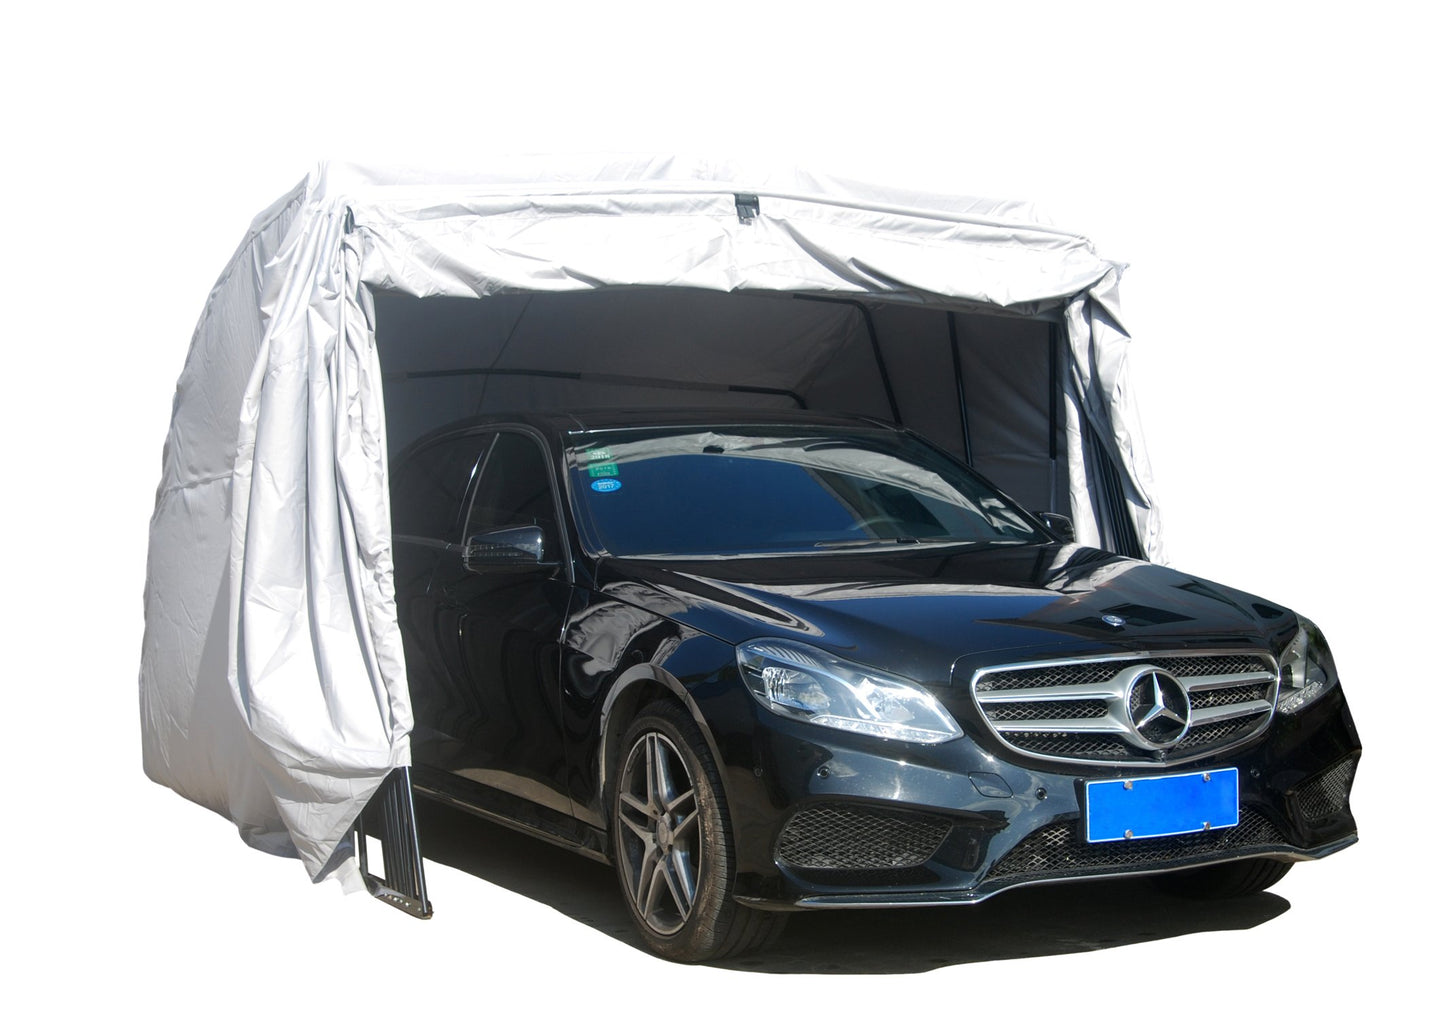 Ikuby All Weather Proof Carport, Car Shelter, Car Canopy, Car Garage, Car shed, Car House, Car Park, Foldable, Retractable, Lockable, Durable Shelter Large Gray